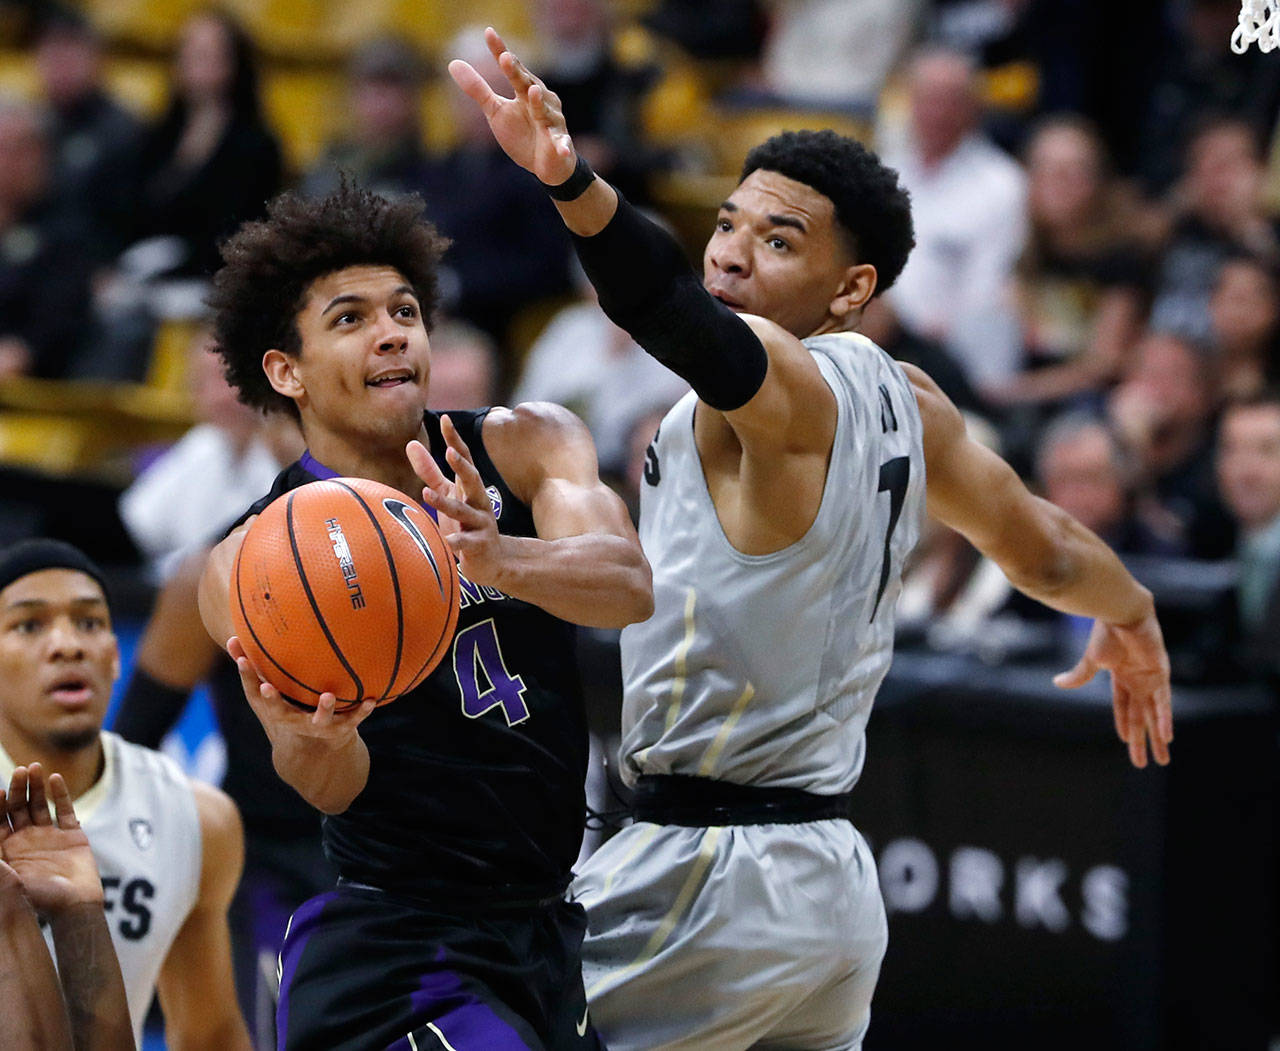 Washington guard Matisse Thybulle (left) drive to the basket past Colorado guard Tyler Bey during the first half of a game Jan. 20, 2018, in Boulder, Colo. (AP Photo/David Zalubowski)